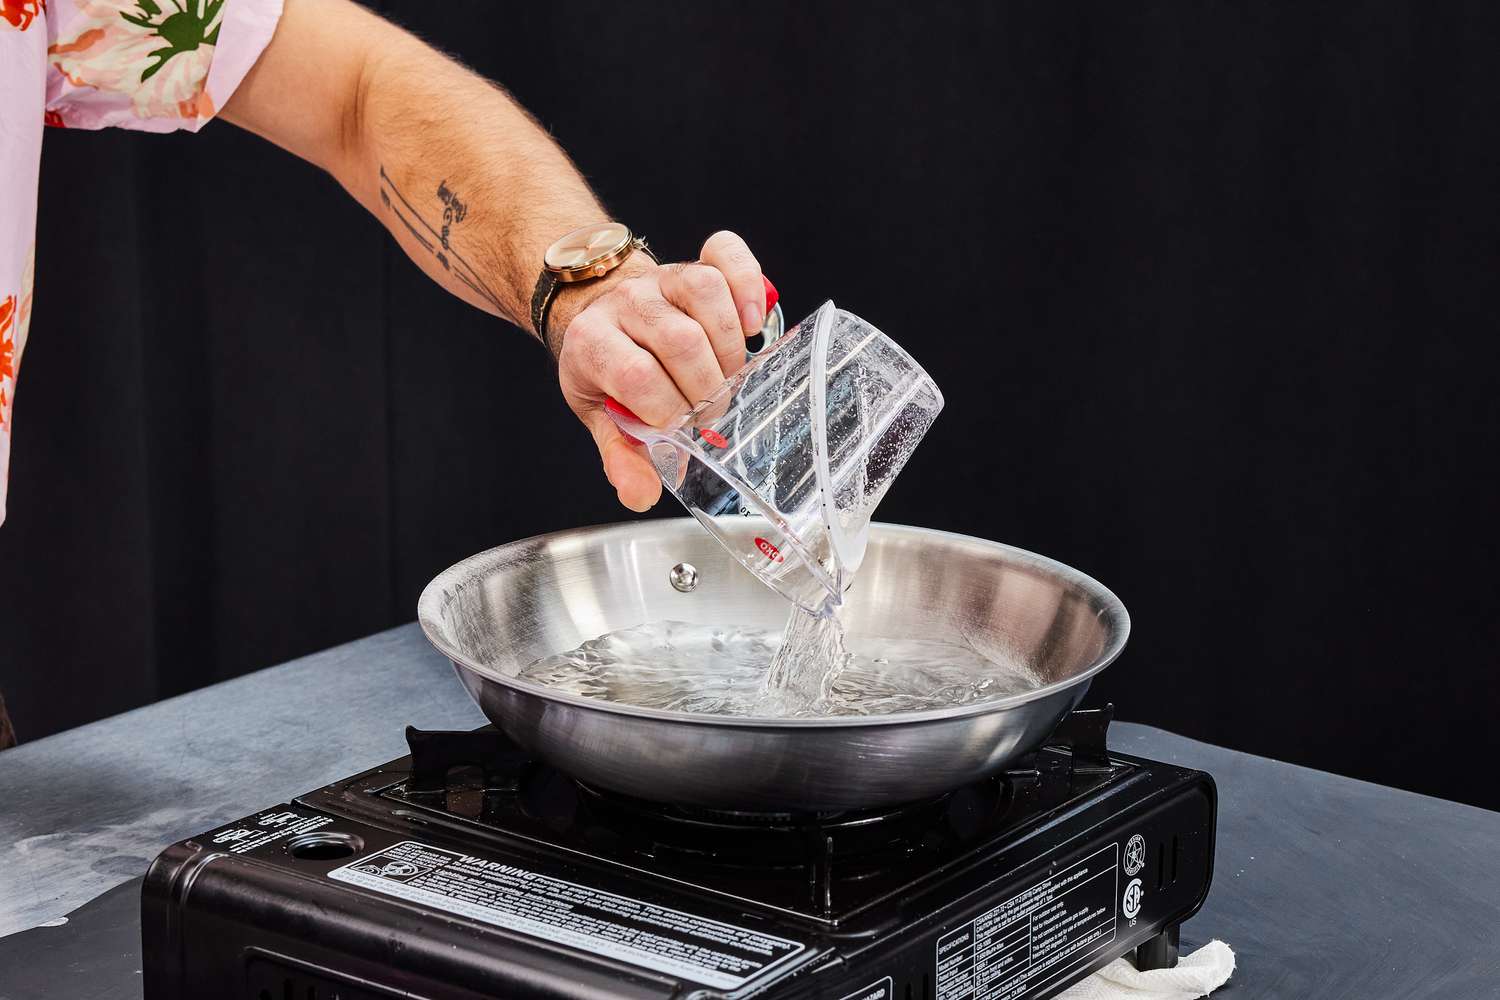 a person pouring water from a measuring cup into a stainless steel skillet